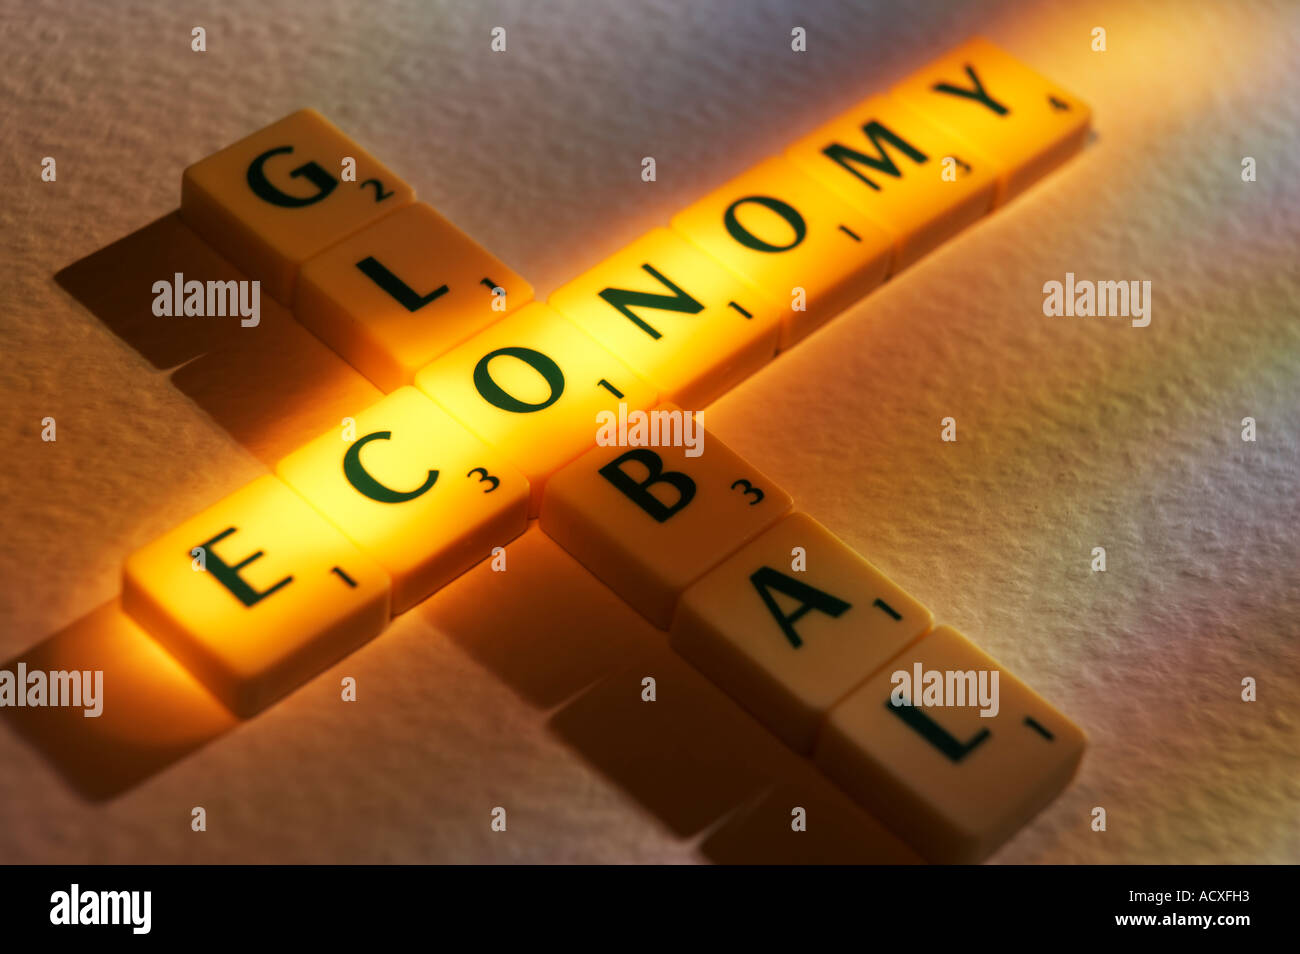 SCRABBLE BOARD GAME LETTERS SPELLING THE WORDS GLOBAL ECONOMY Stock Photo